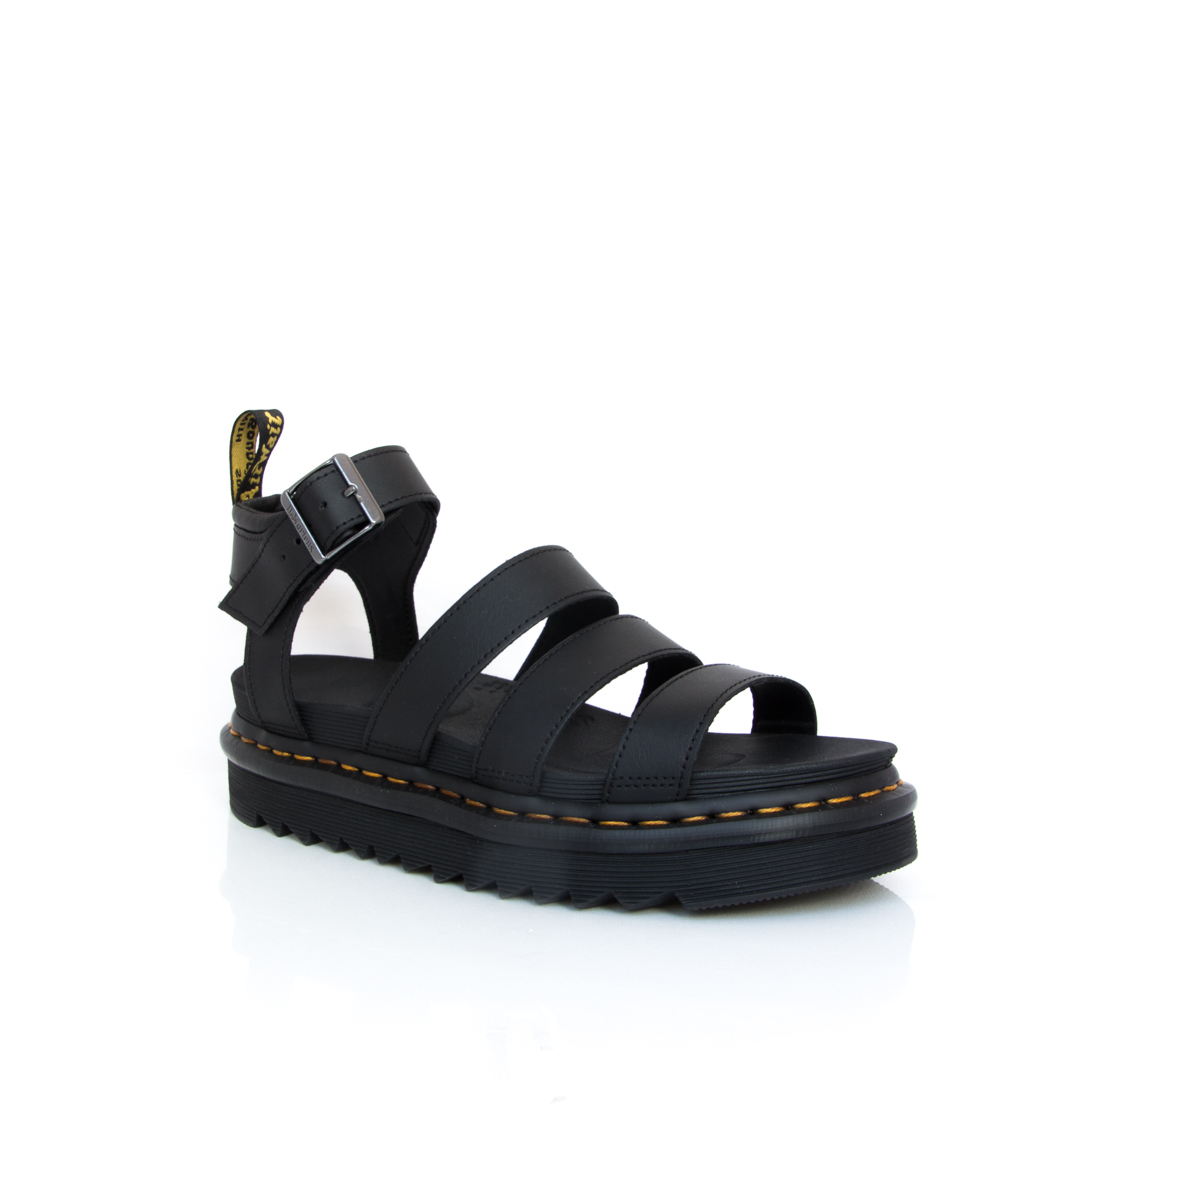 Dr Martens Blaire Hydro Black Sandal - Issimo Shoes